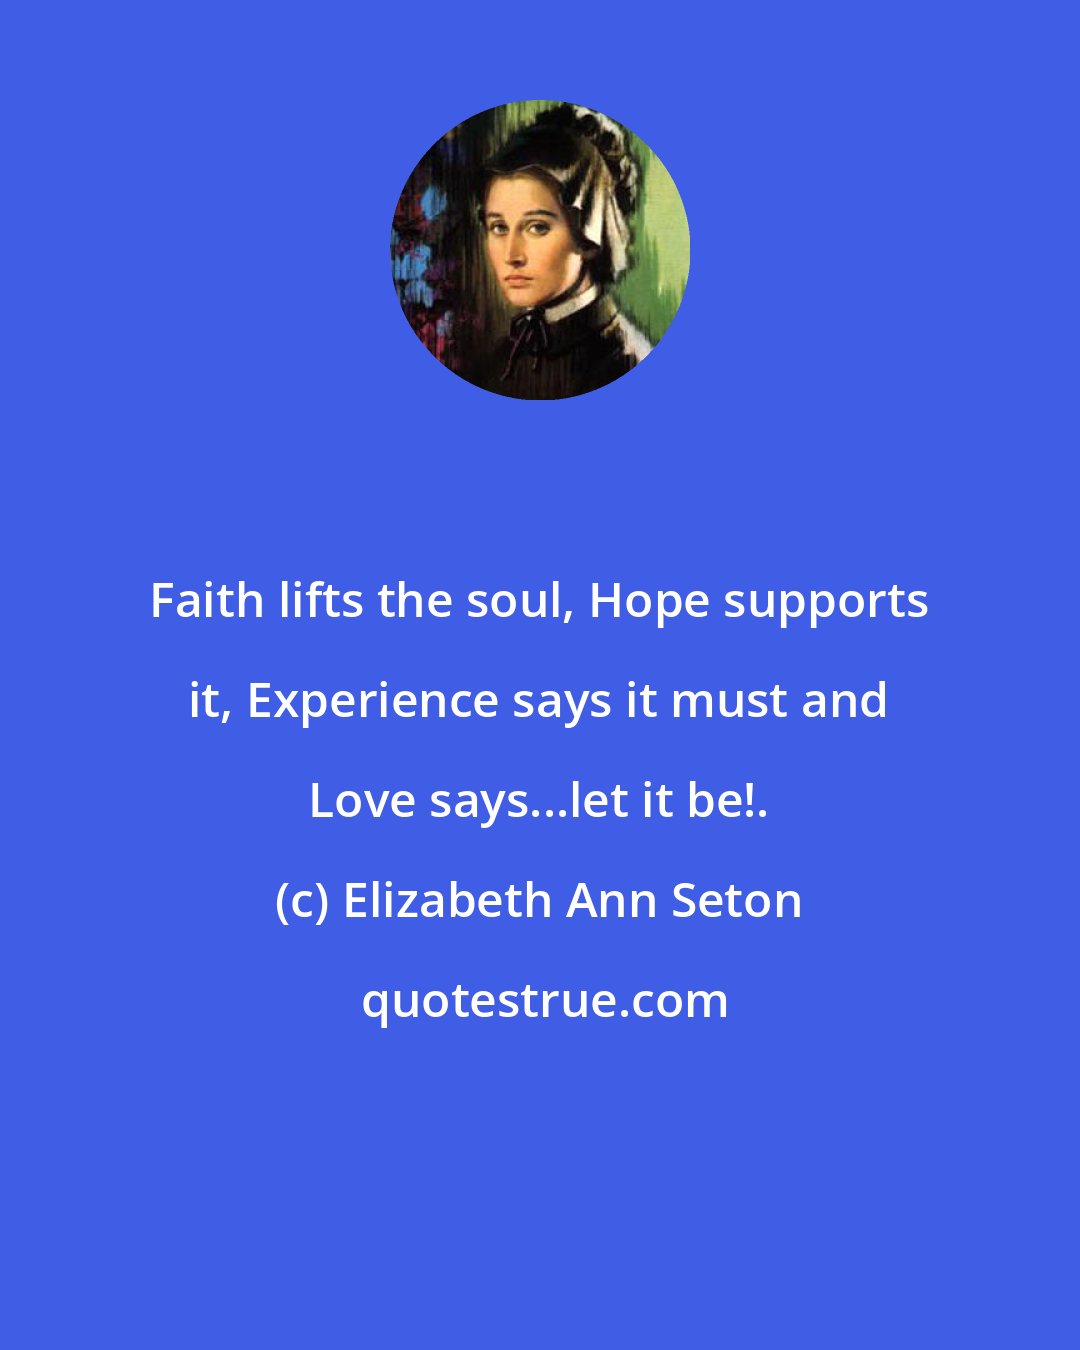 Elizabeth Ann Seton: Faith lifts the soul, Hope supports it, Experience says it must and Love says...let it be!.